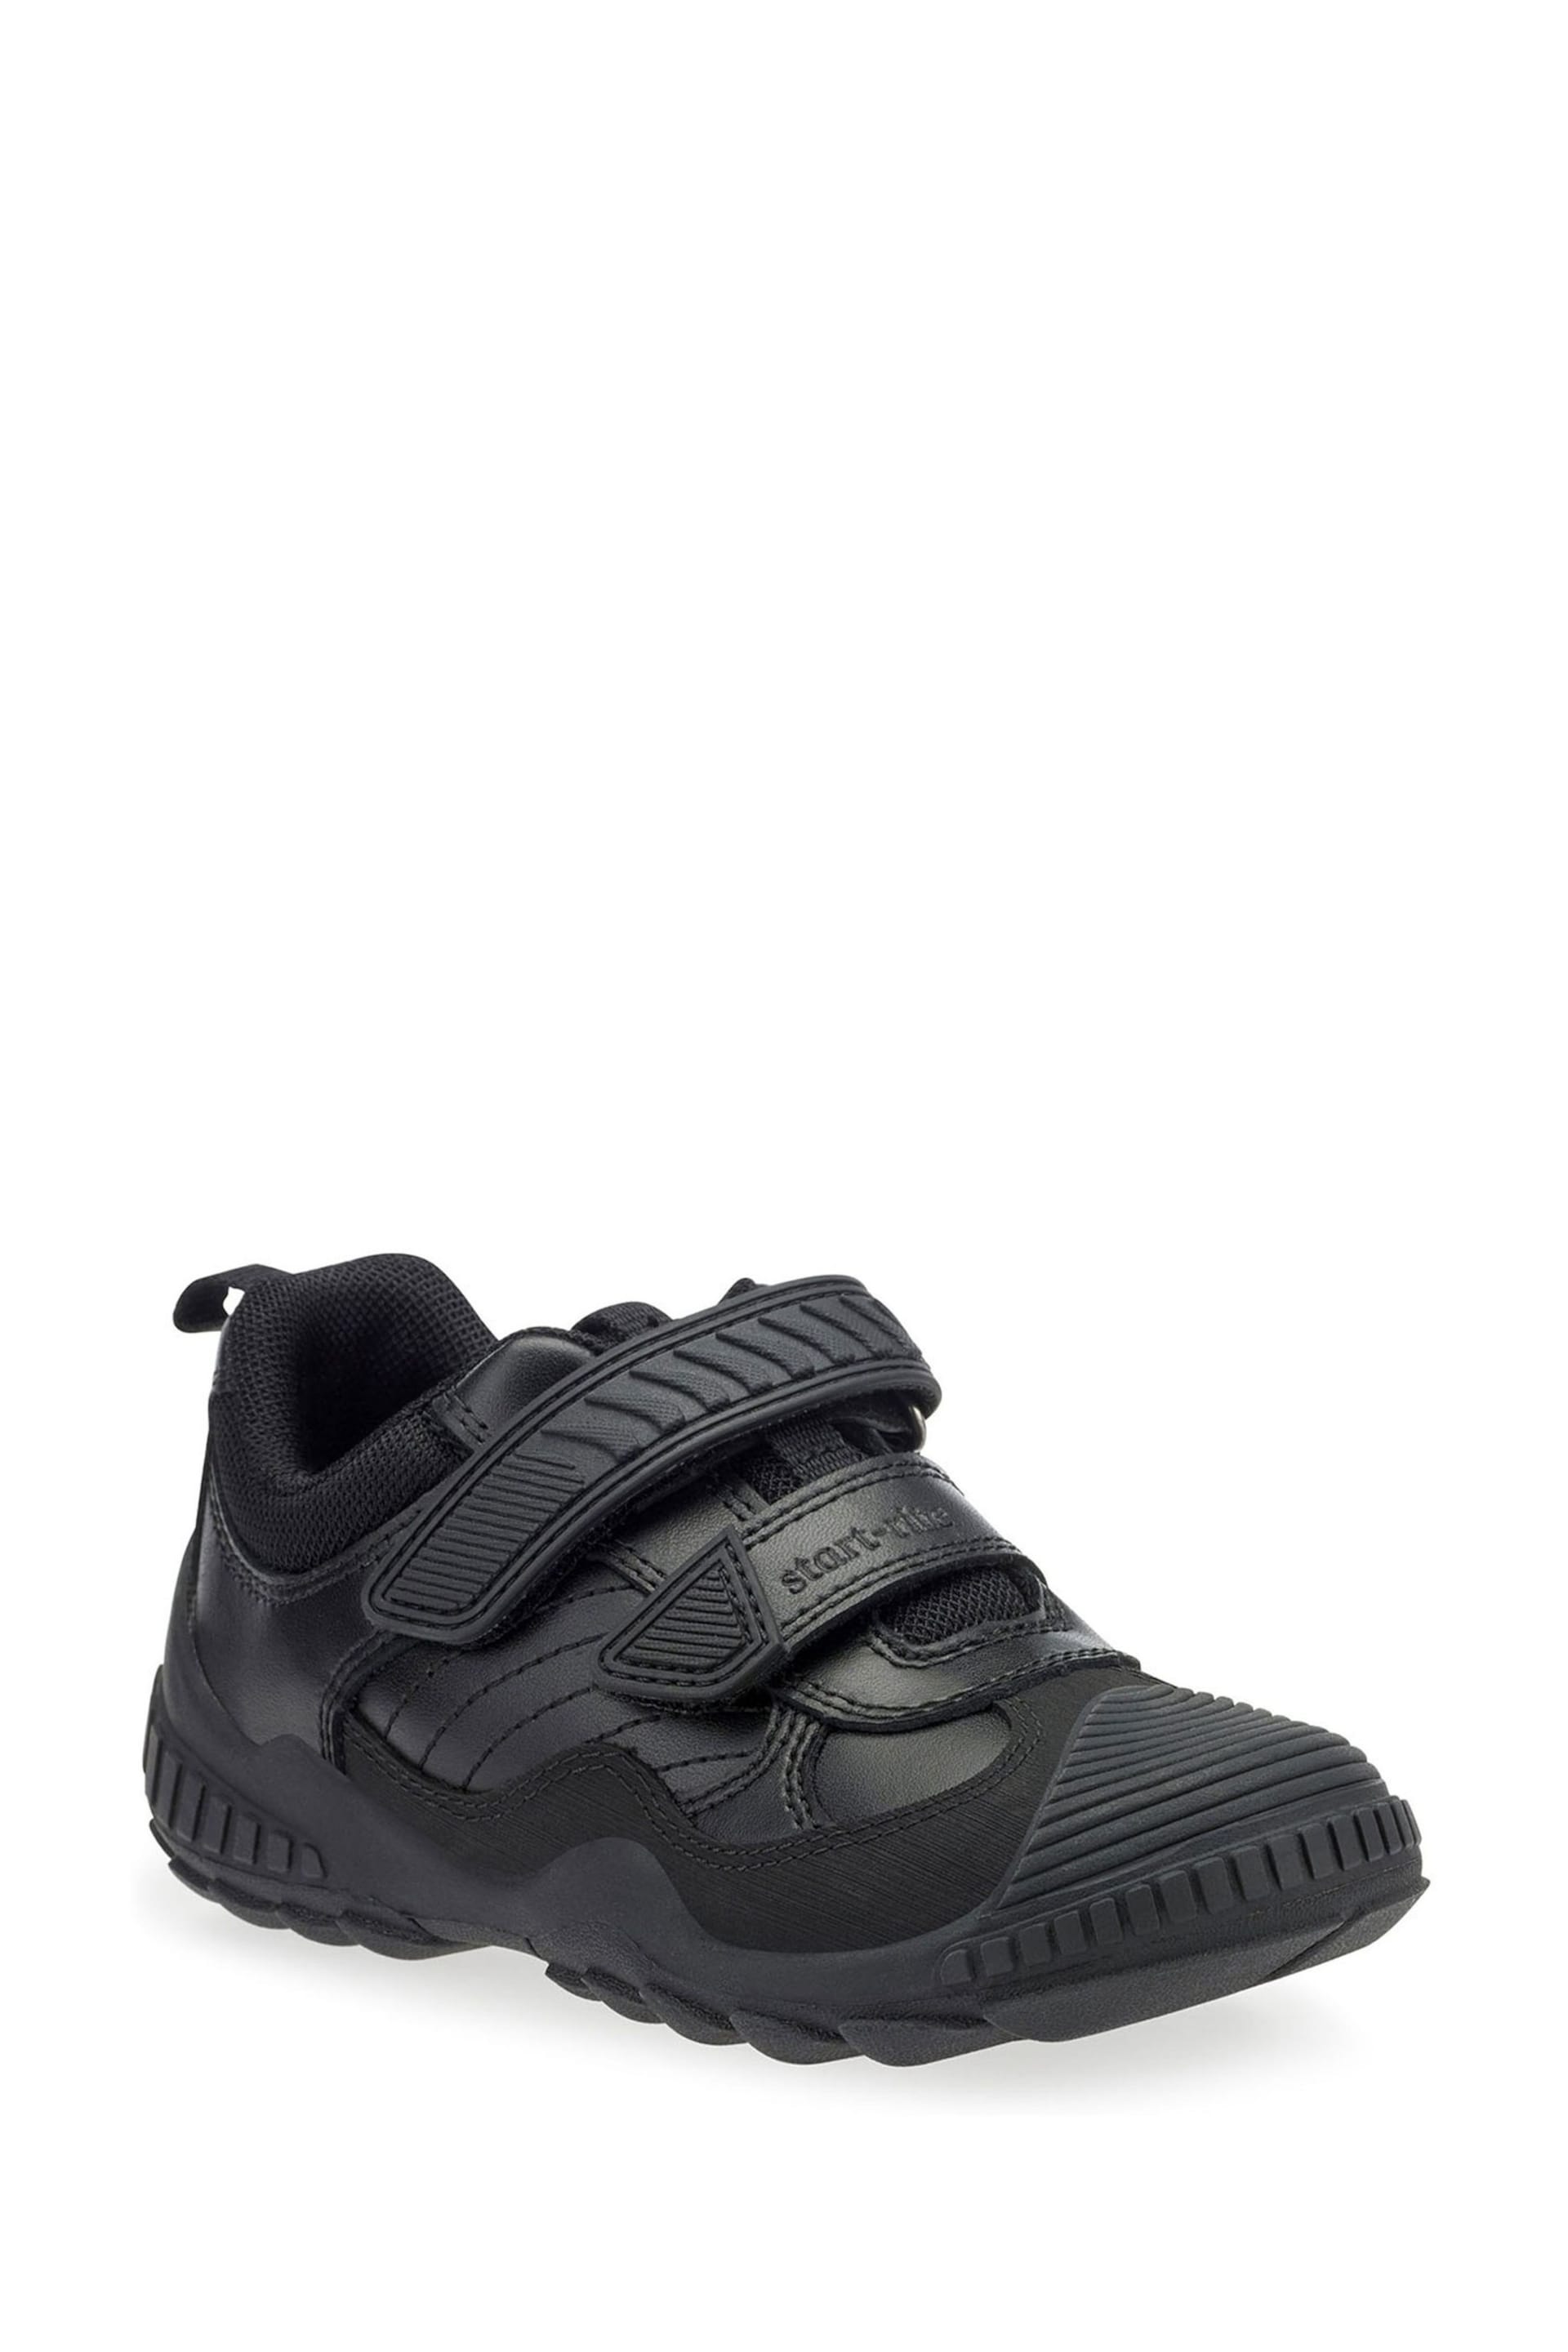 Start-Rite Extreme Pri Black Leather School Shoes G Fit - Image 3 of 6